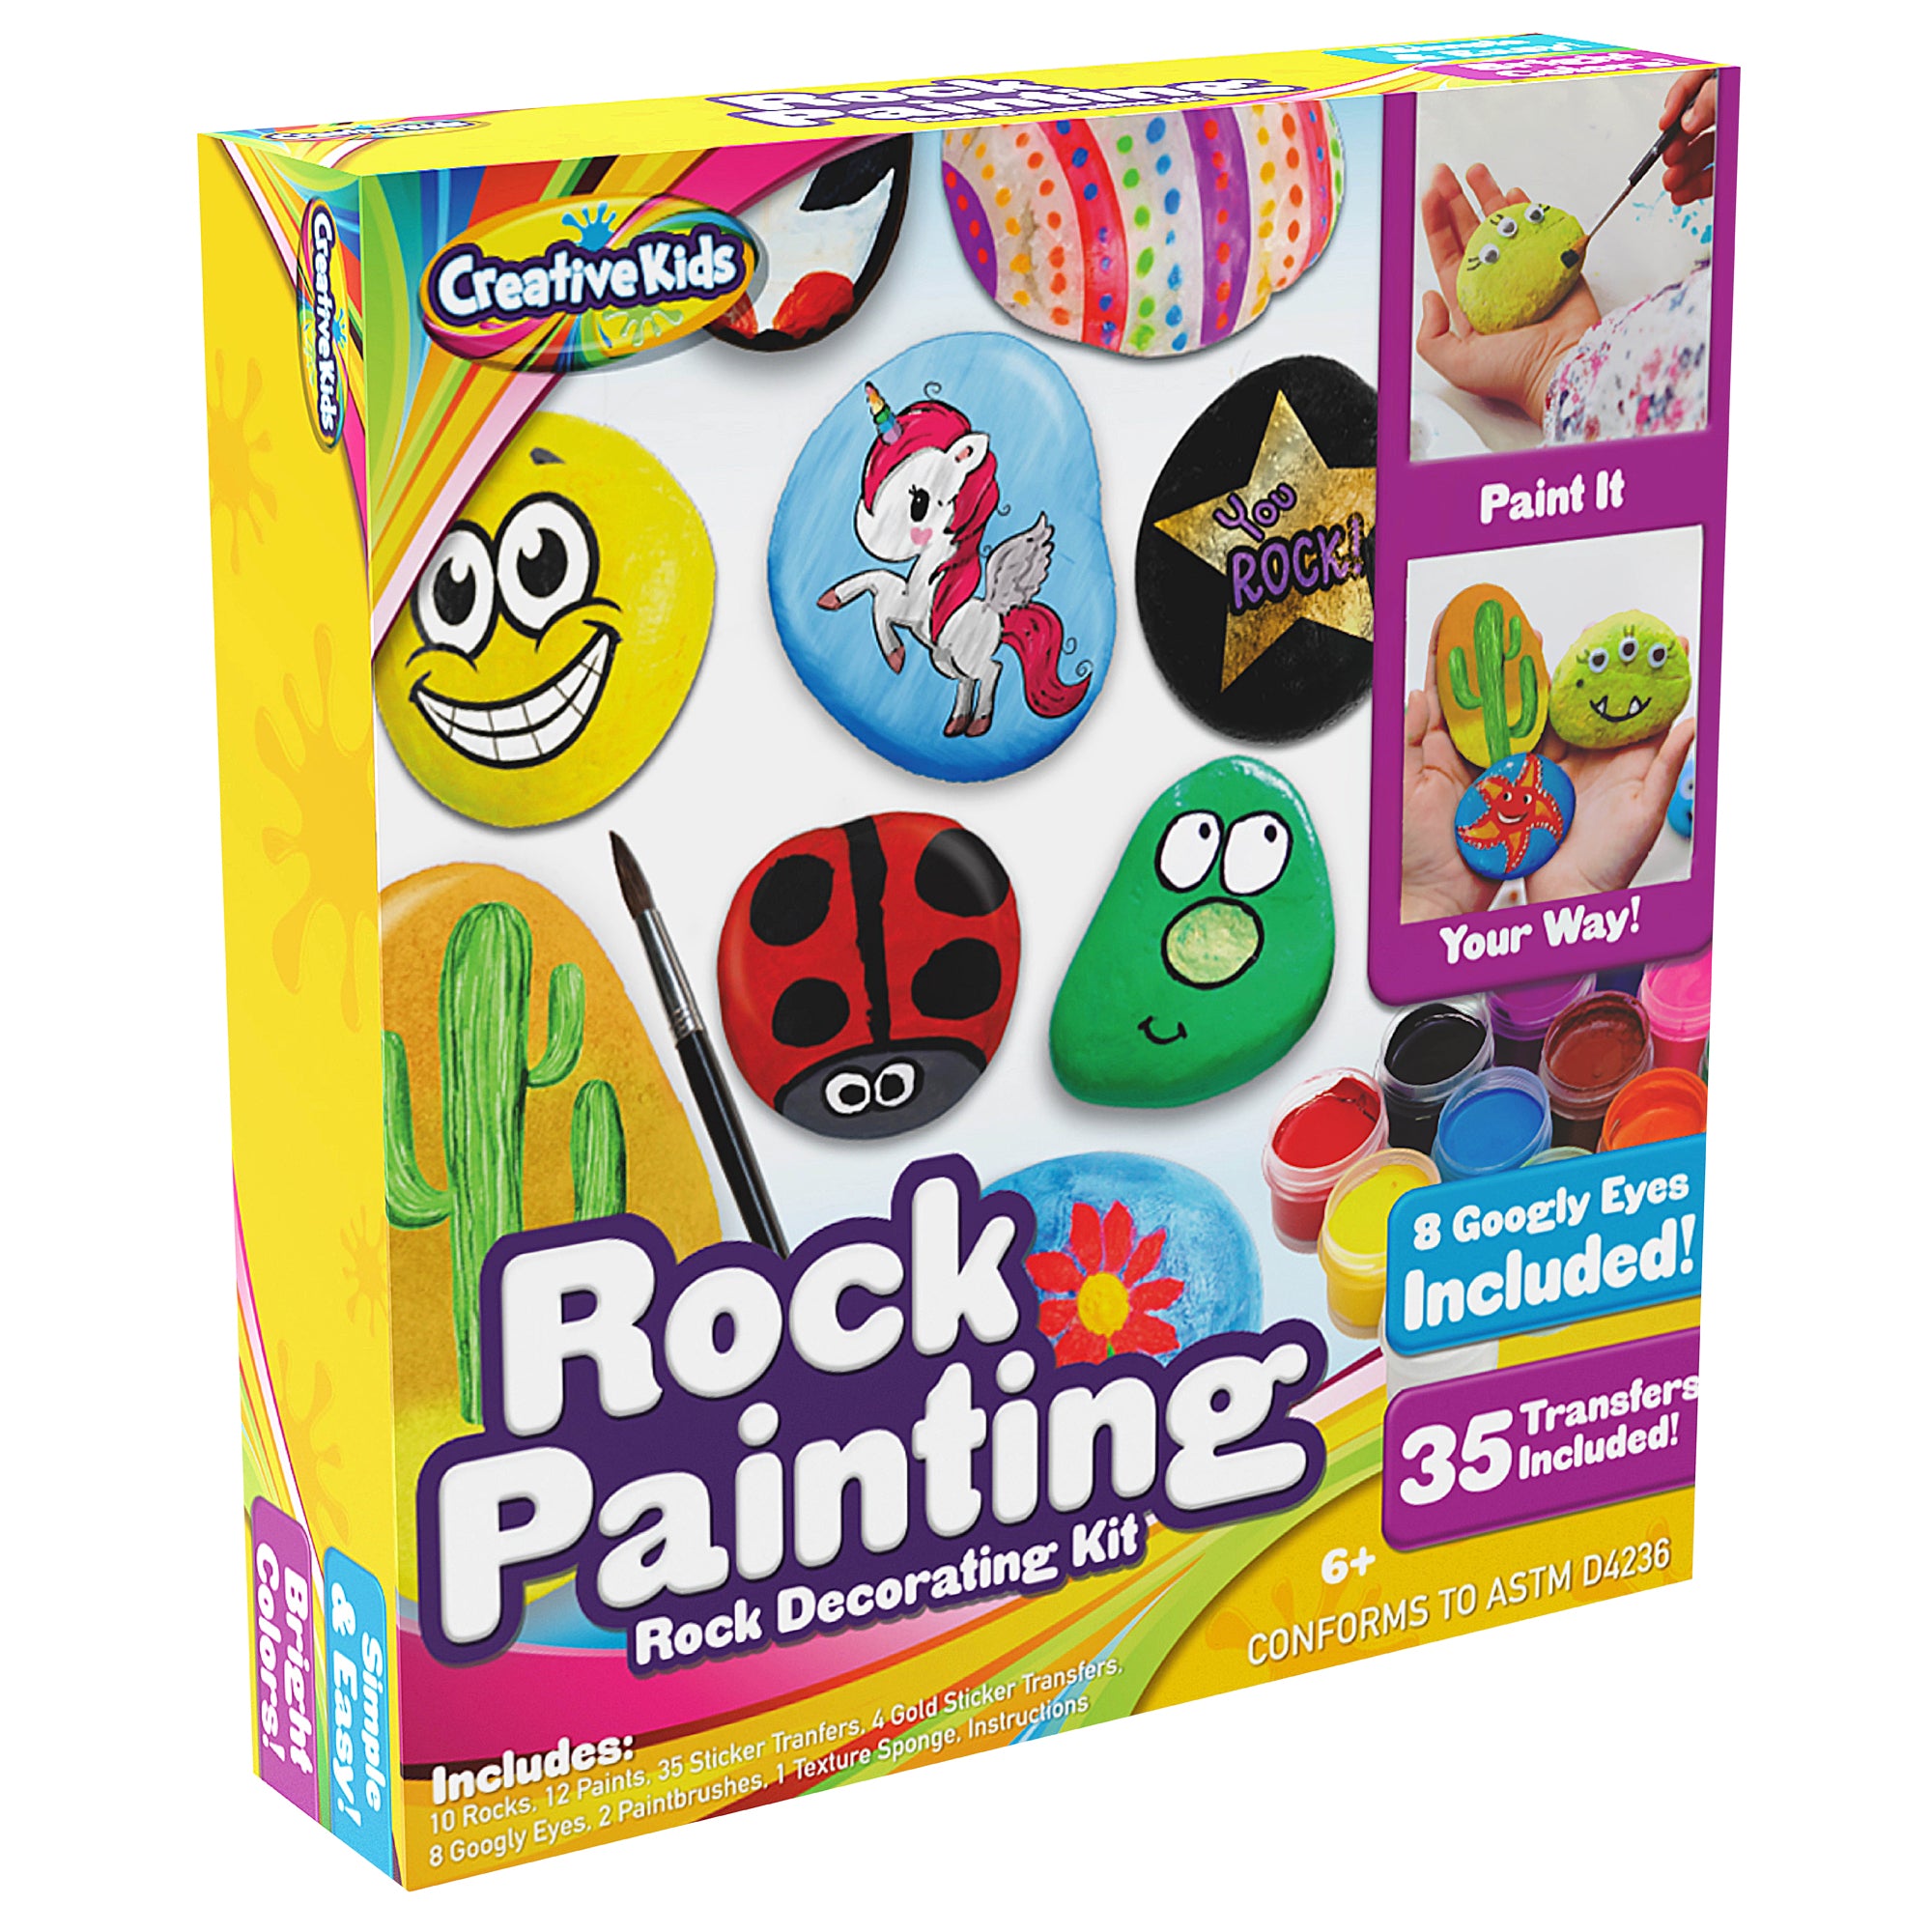 Dan&Darci Rock Painting Kit for Kids - Arts and Crafts for Girls